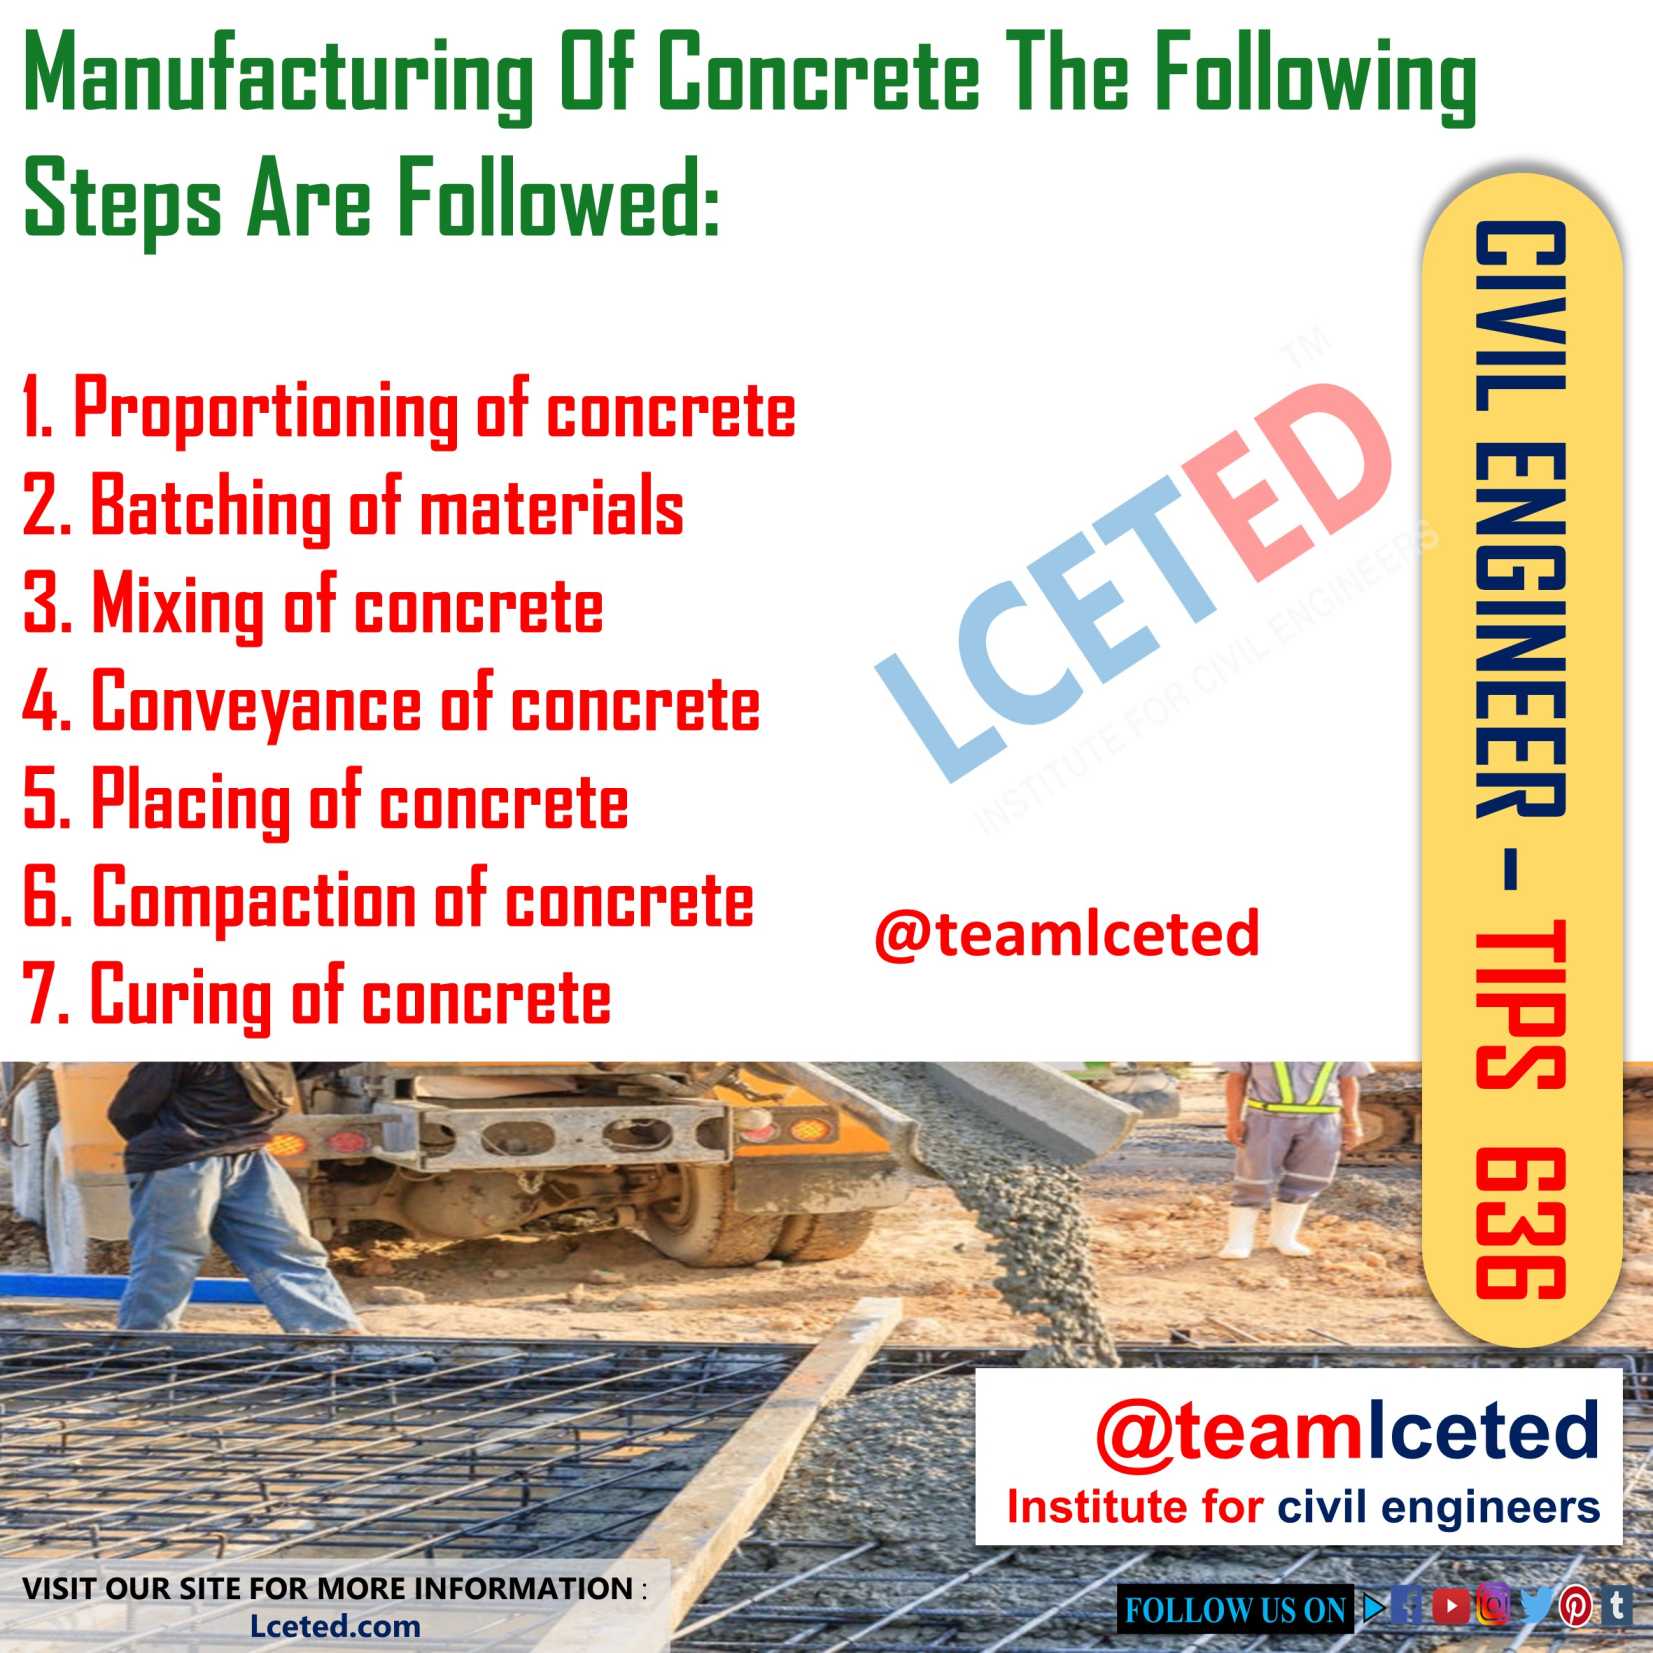 Manufacturing Process Of Concrete